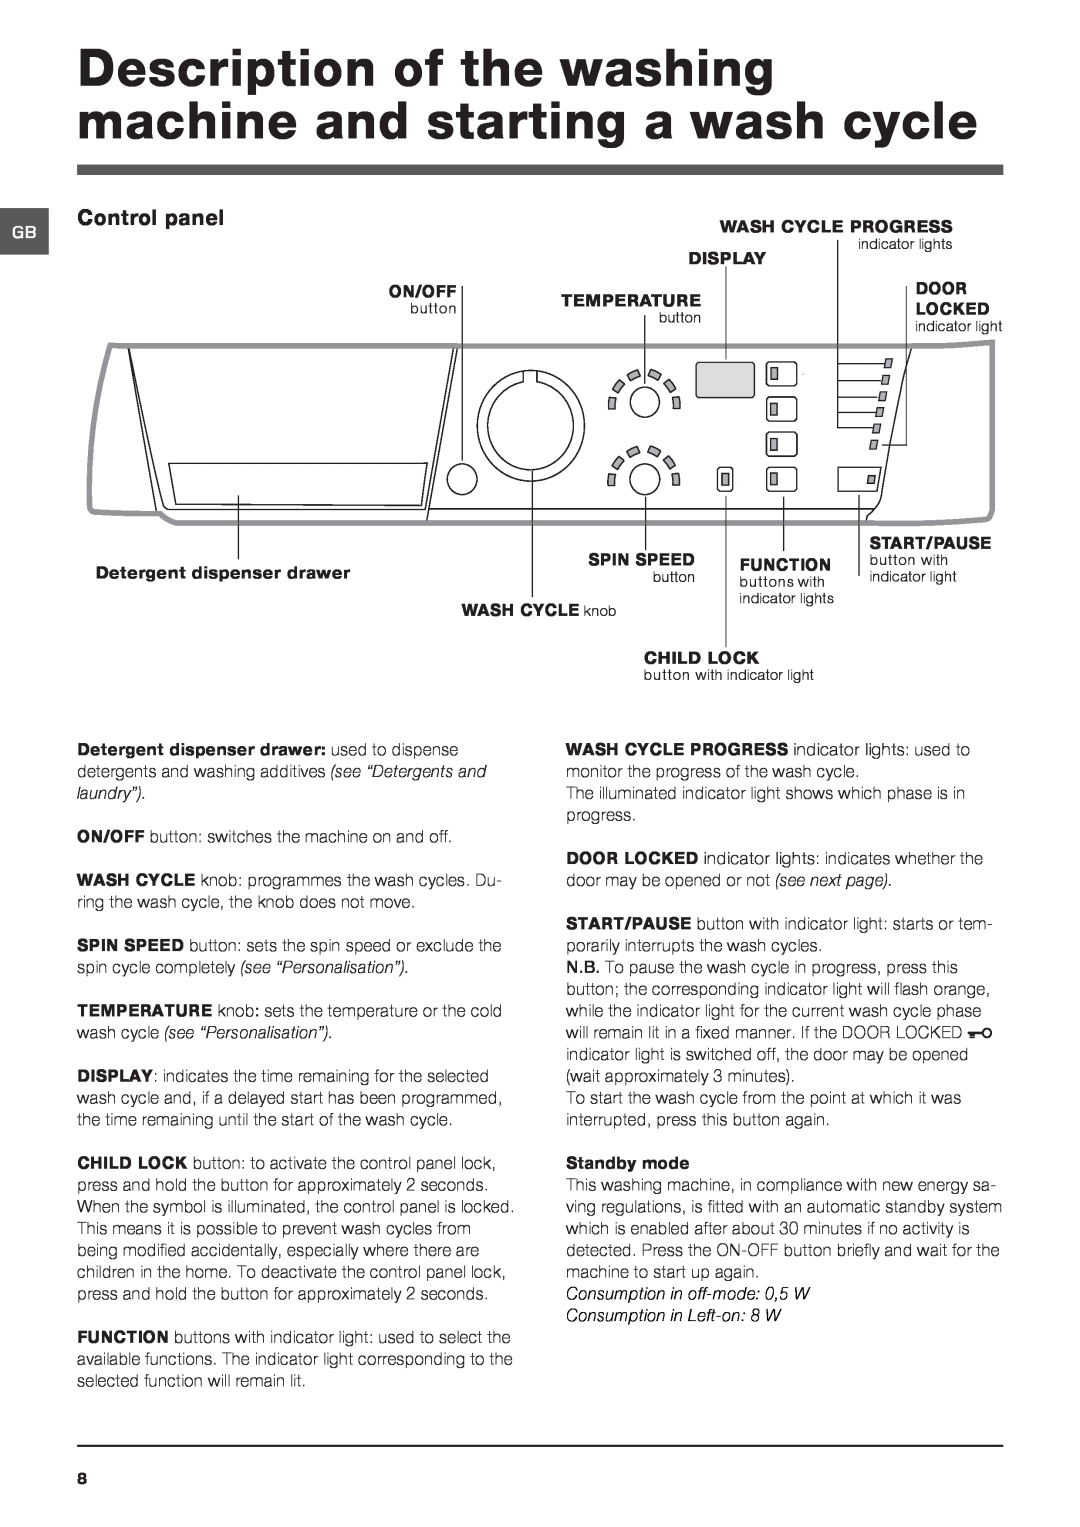 Hotpoint HE7F451 manual Control panel, Consumption in off-mode 0,5 W, Consumption in Left-on 8 W 